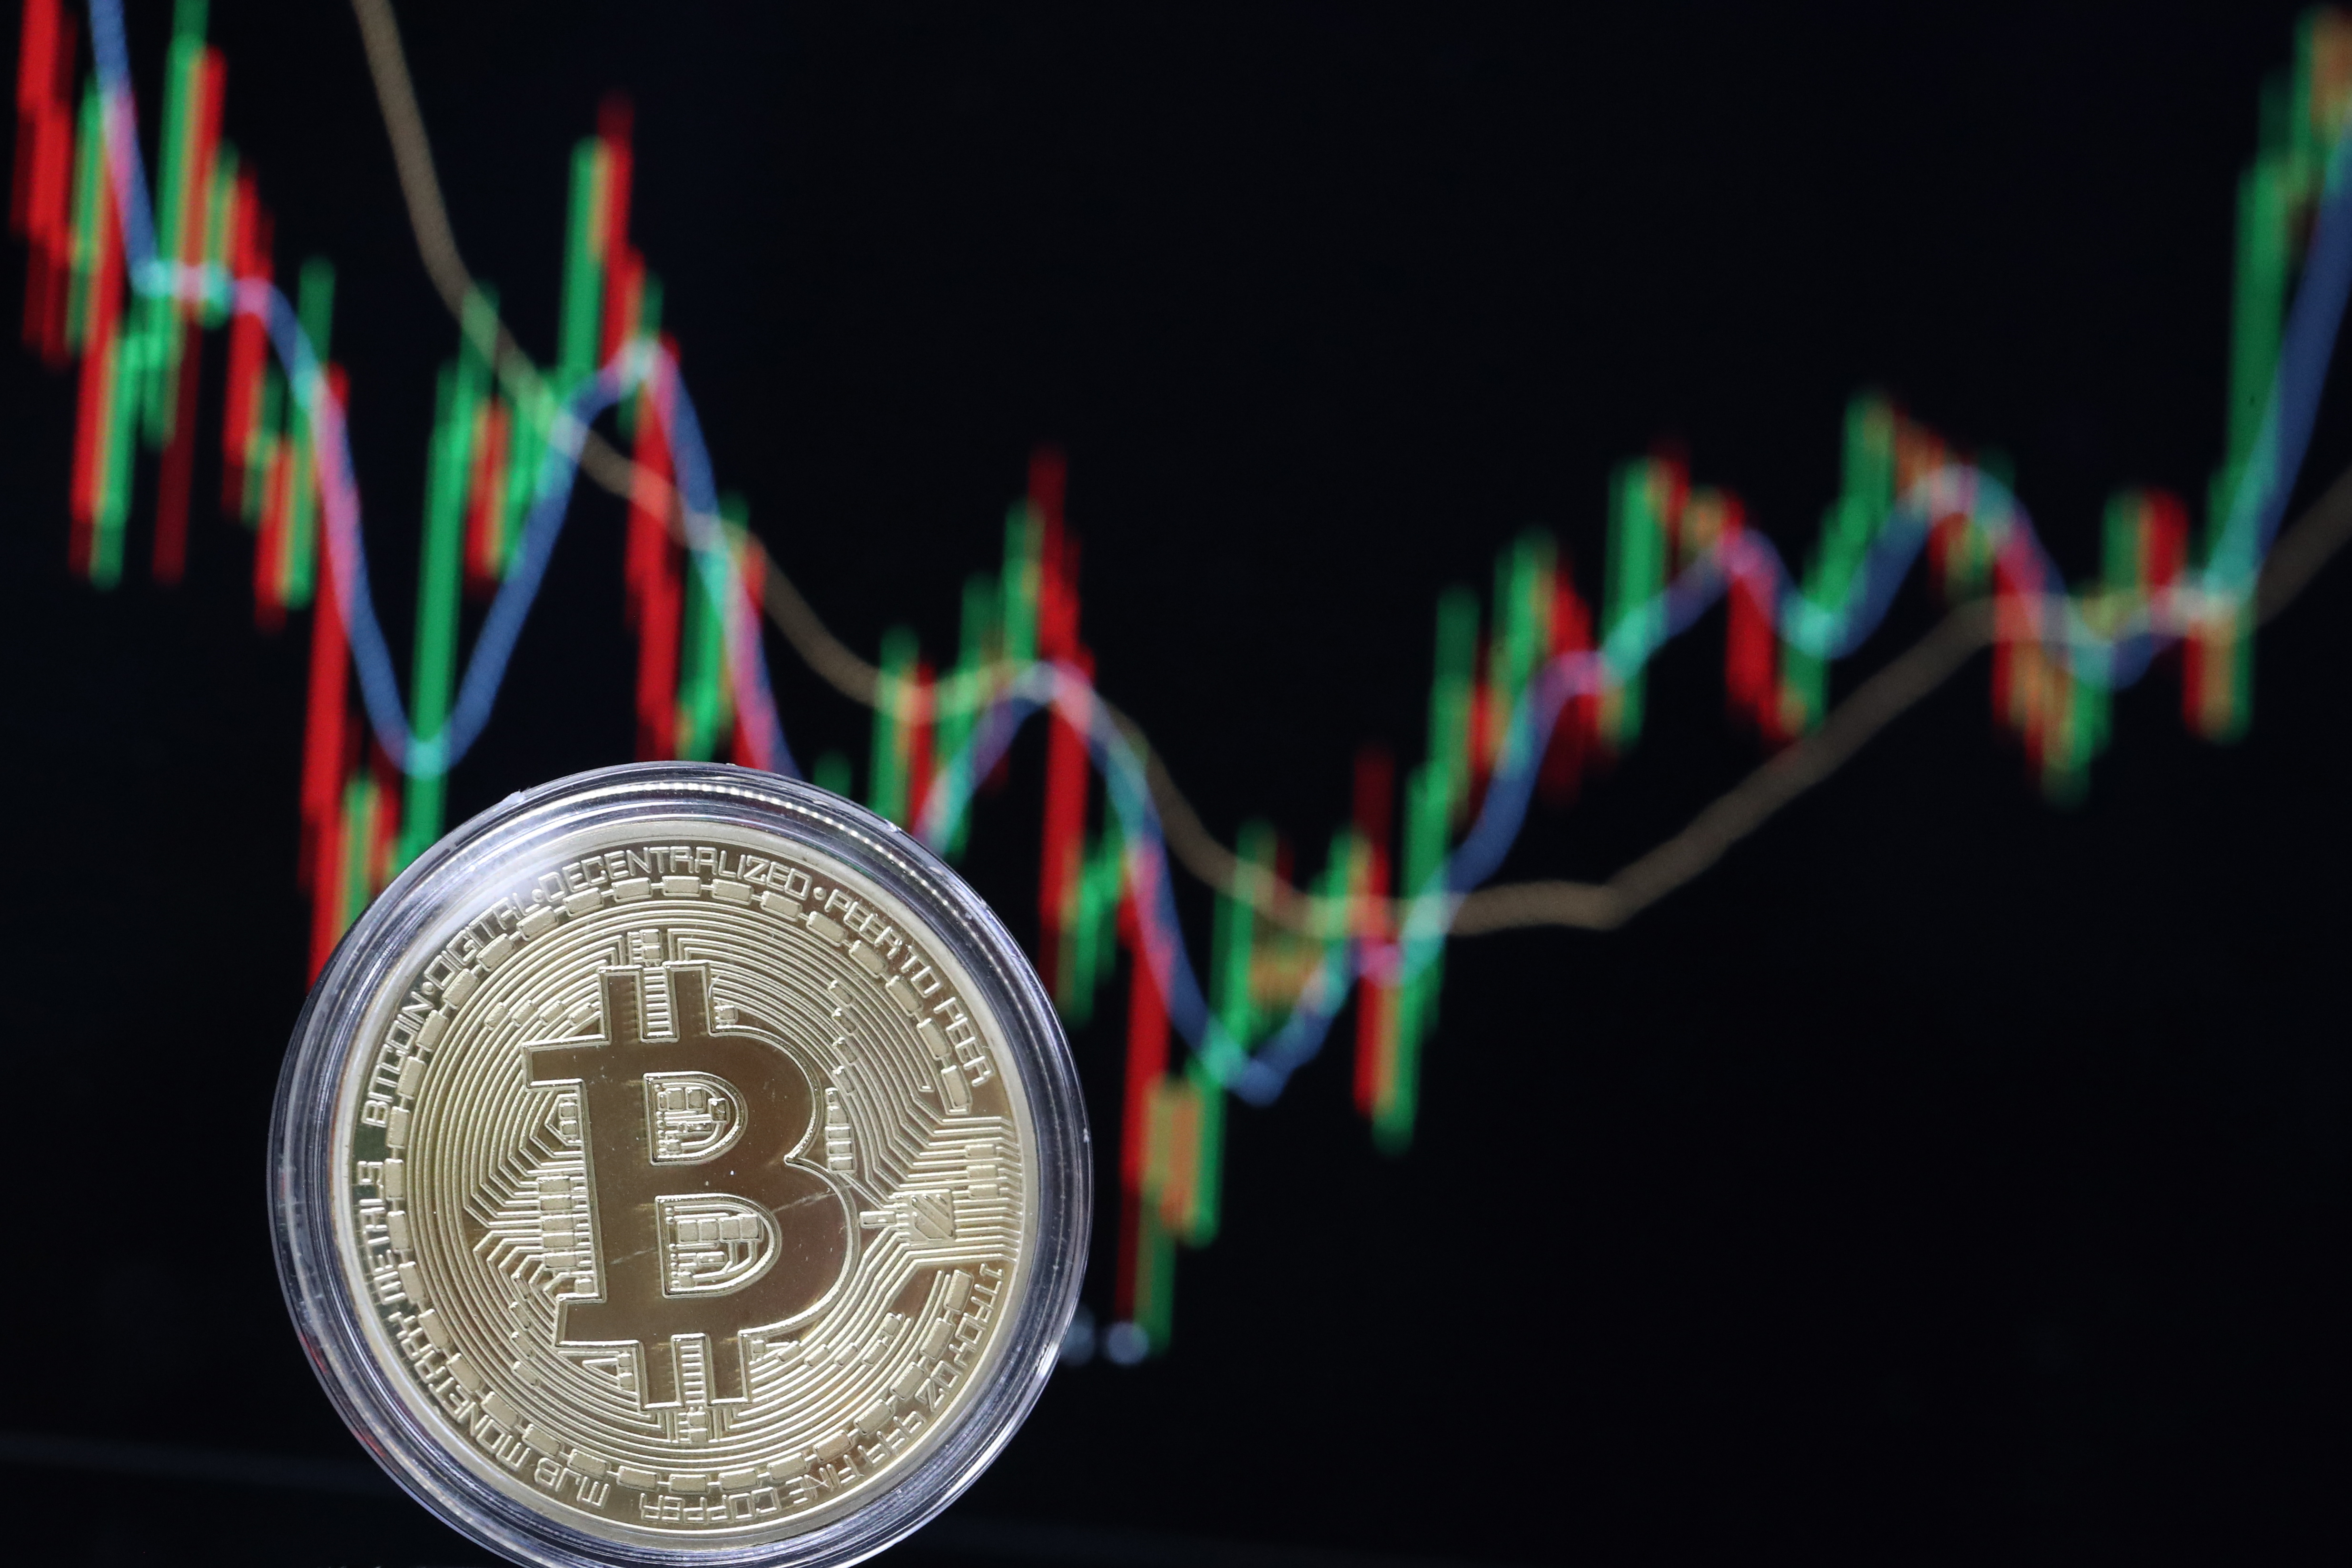 Bitcoin Price Keeps Surging, but Cryptocurrency Is Still a Tiny Asset | Fortune